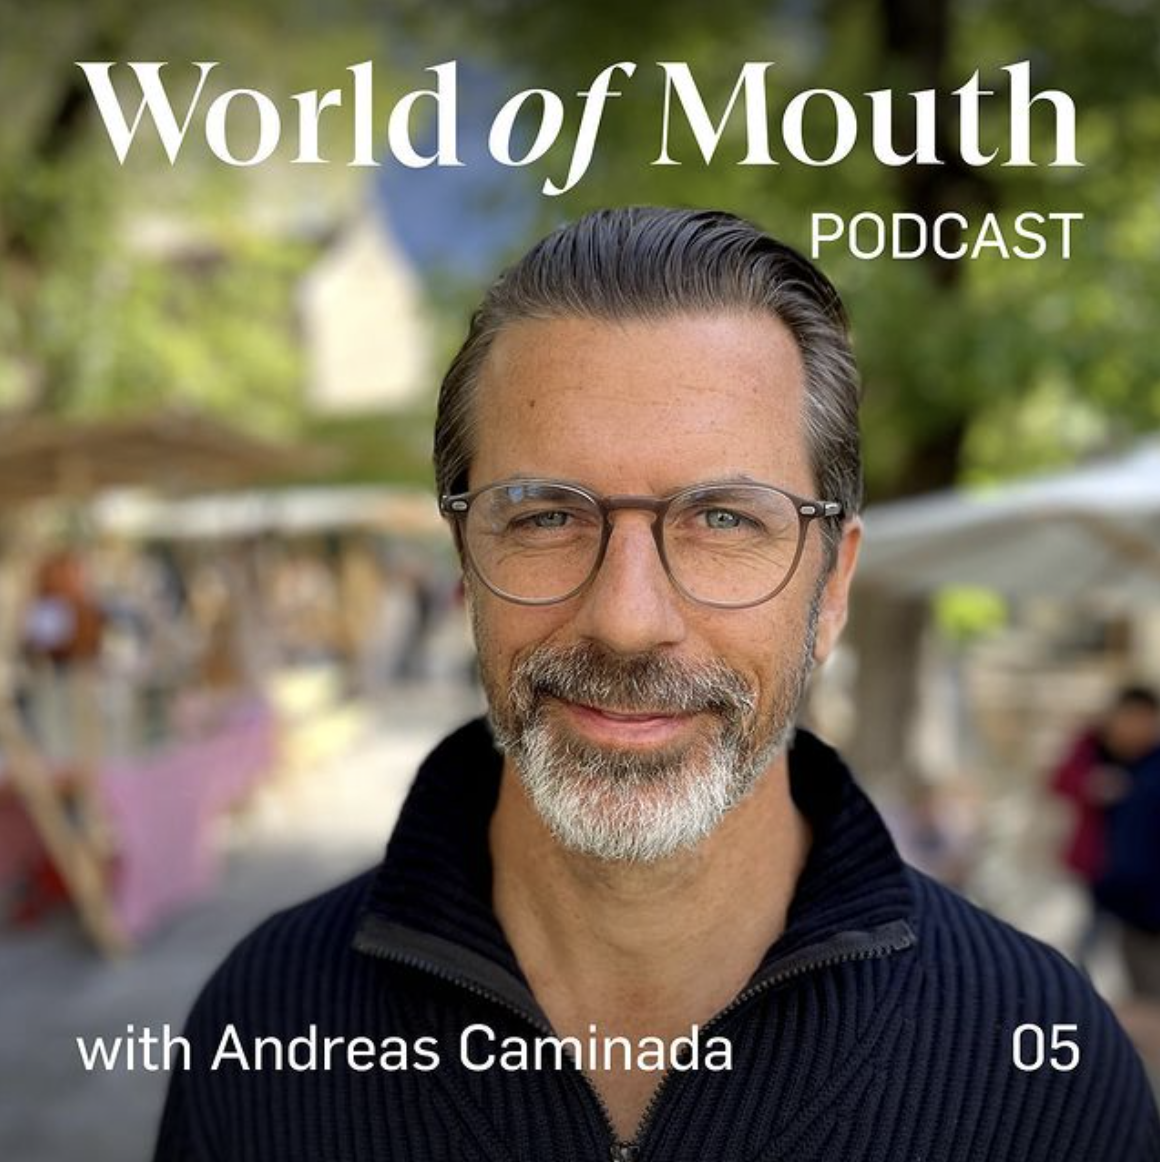 World of mouth podcast